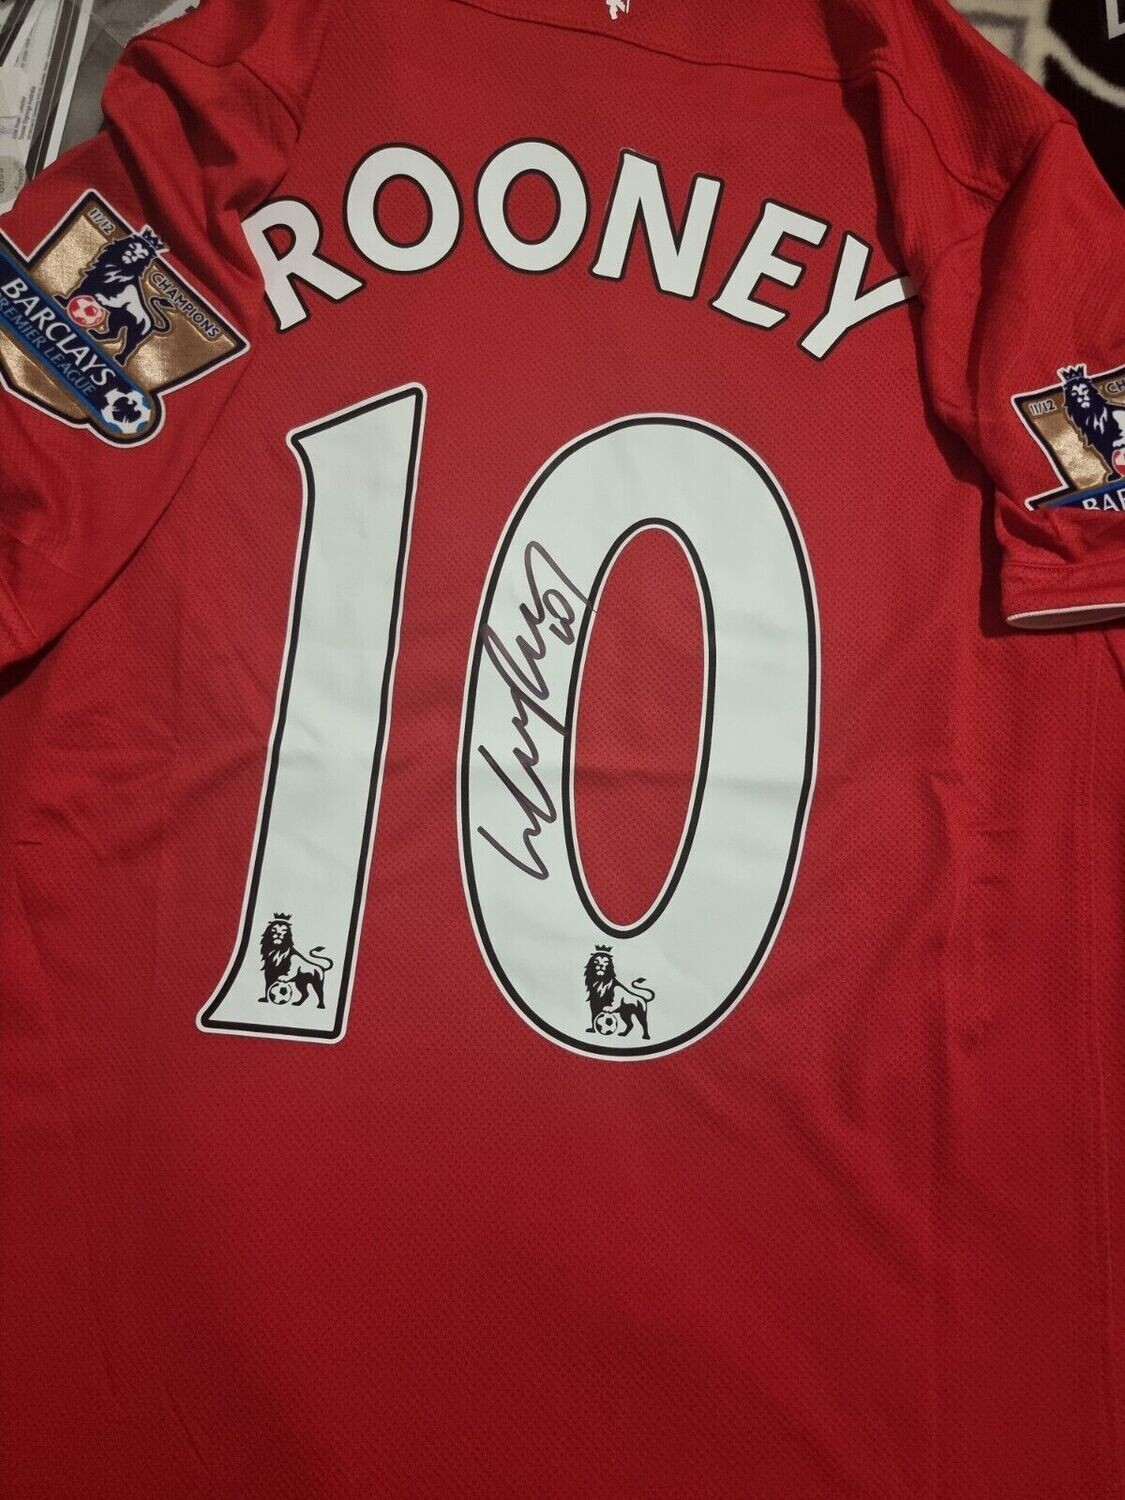 Maglia Jersey Manchester United  ROONEY Man Utd Autografata Signed Autograph Hand Signed Maglia WAYNE ROONEY Rooney